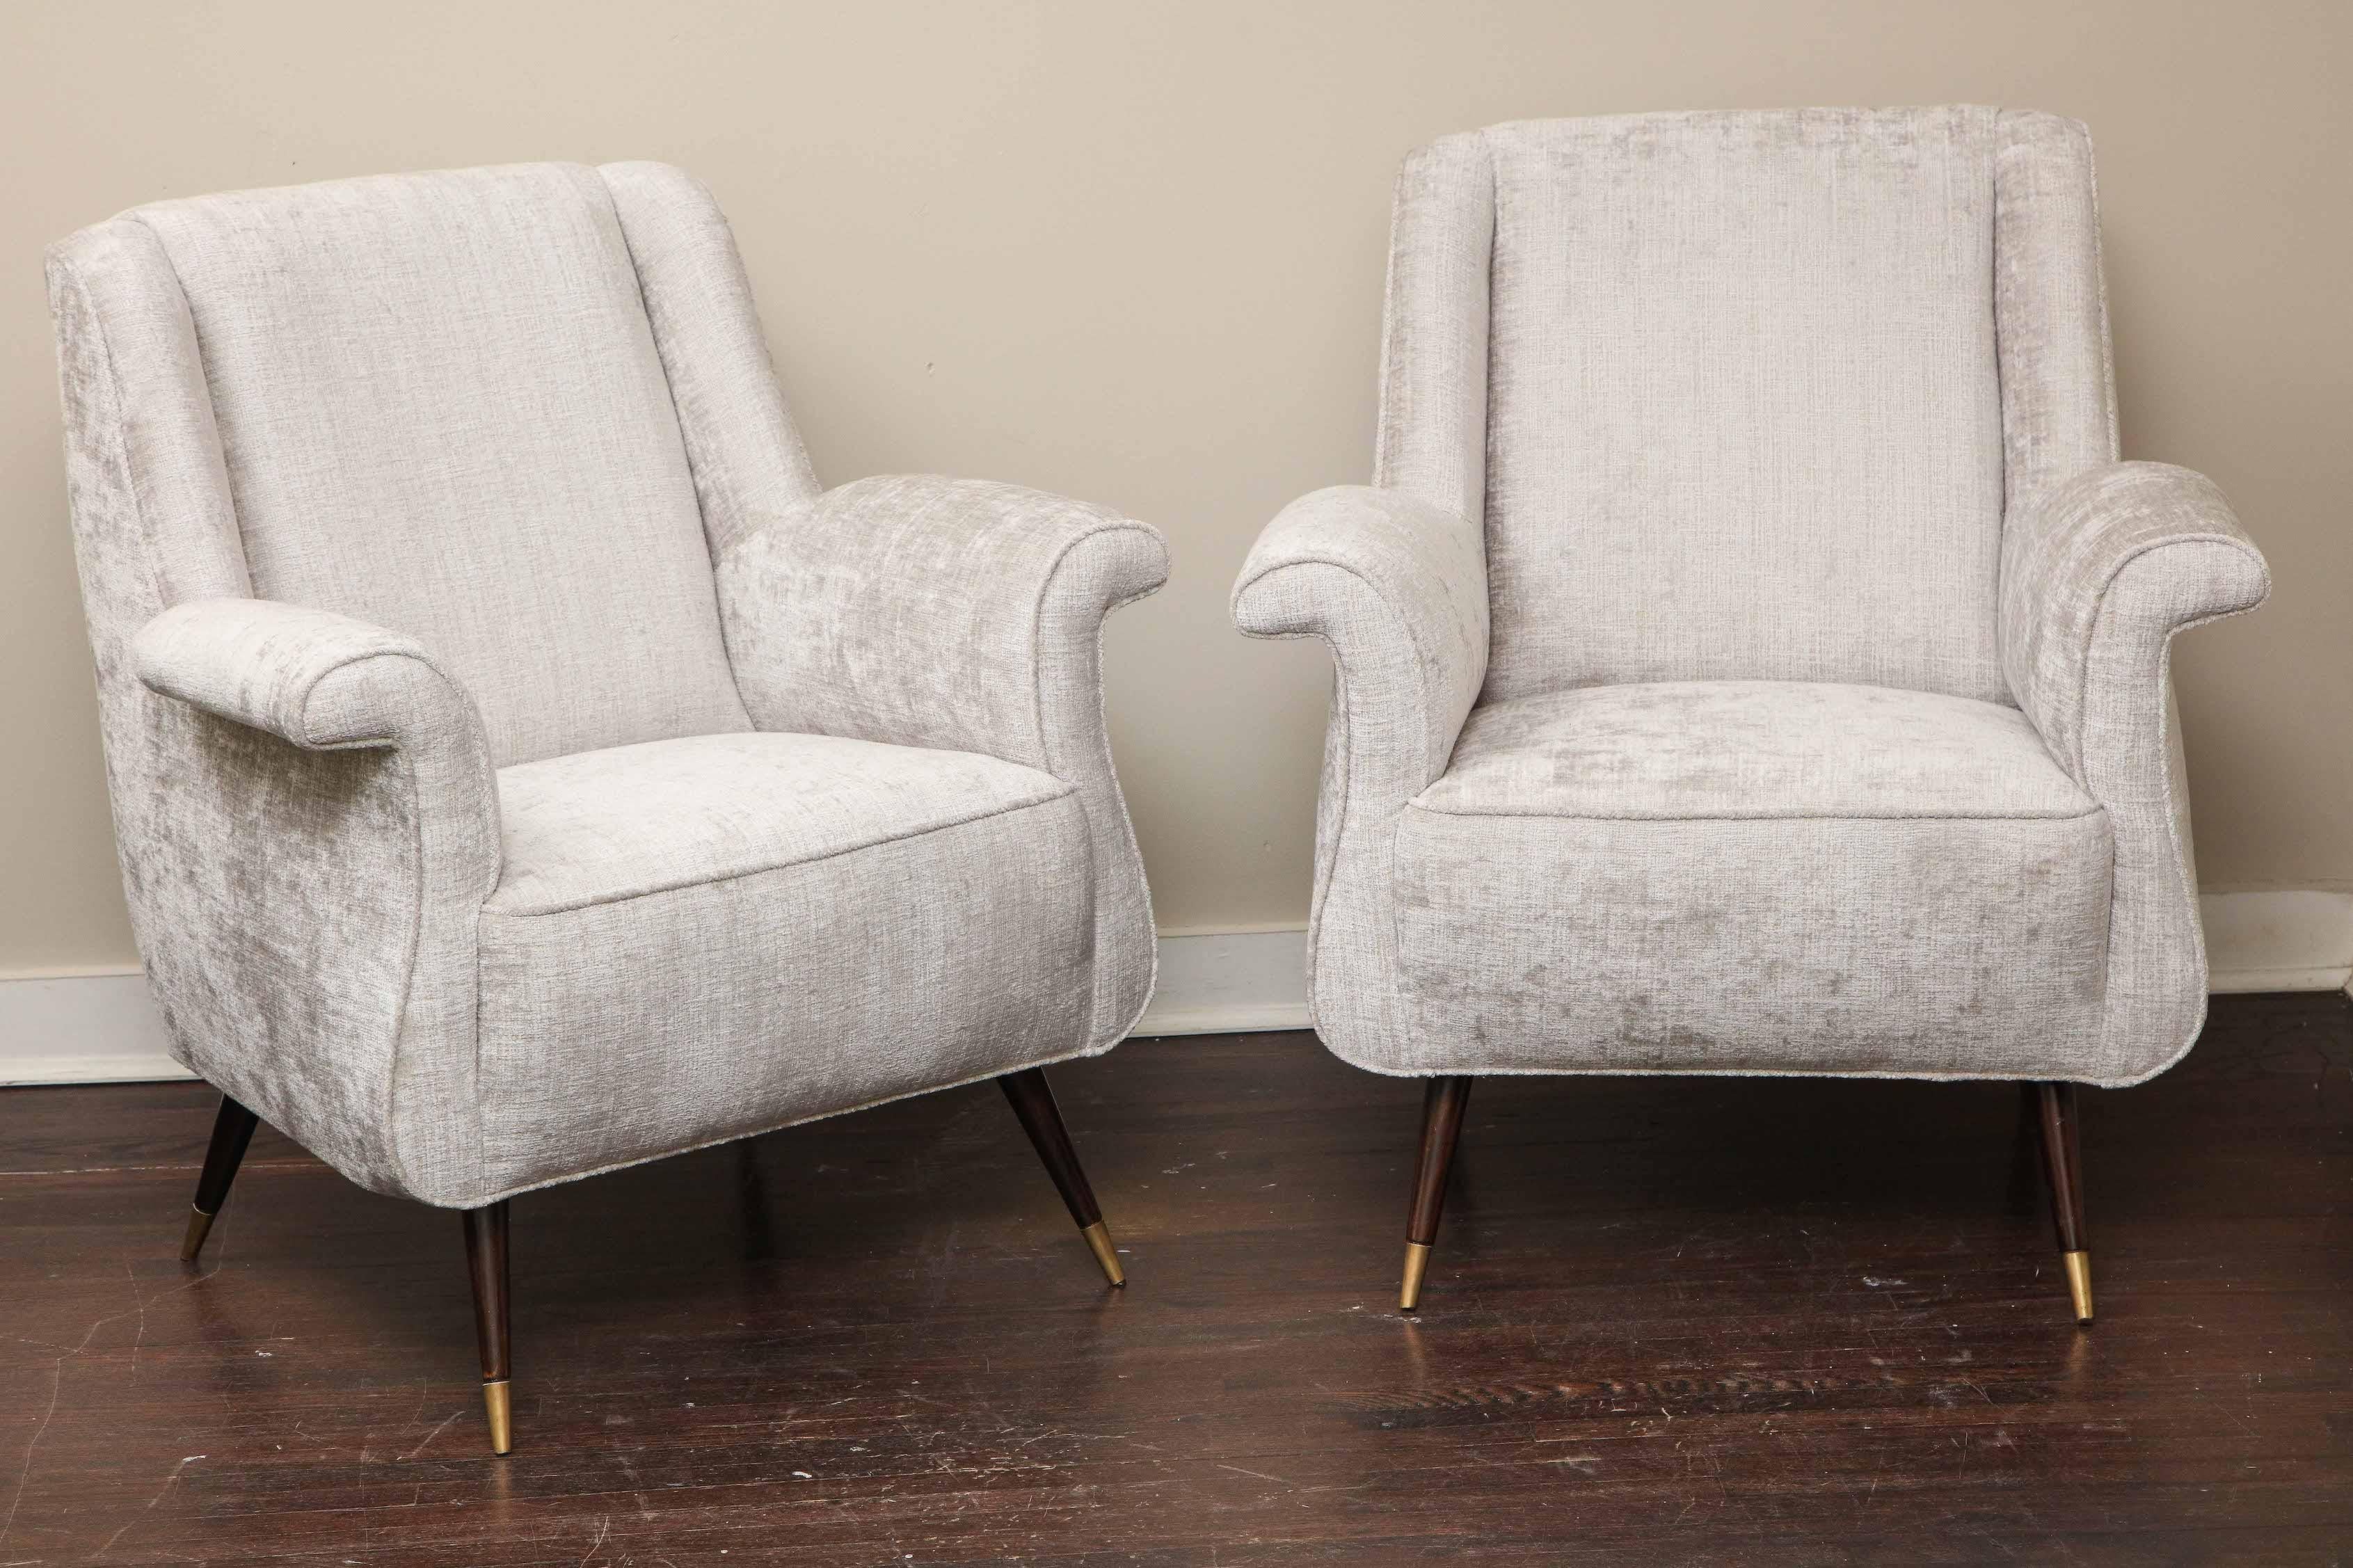 A charming pair of Italian petite rolled armchairs. These chairs are vintage from 1950s and have been reupholstered in platinum velvet.